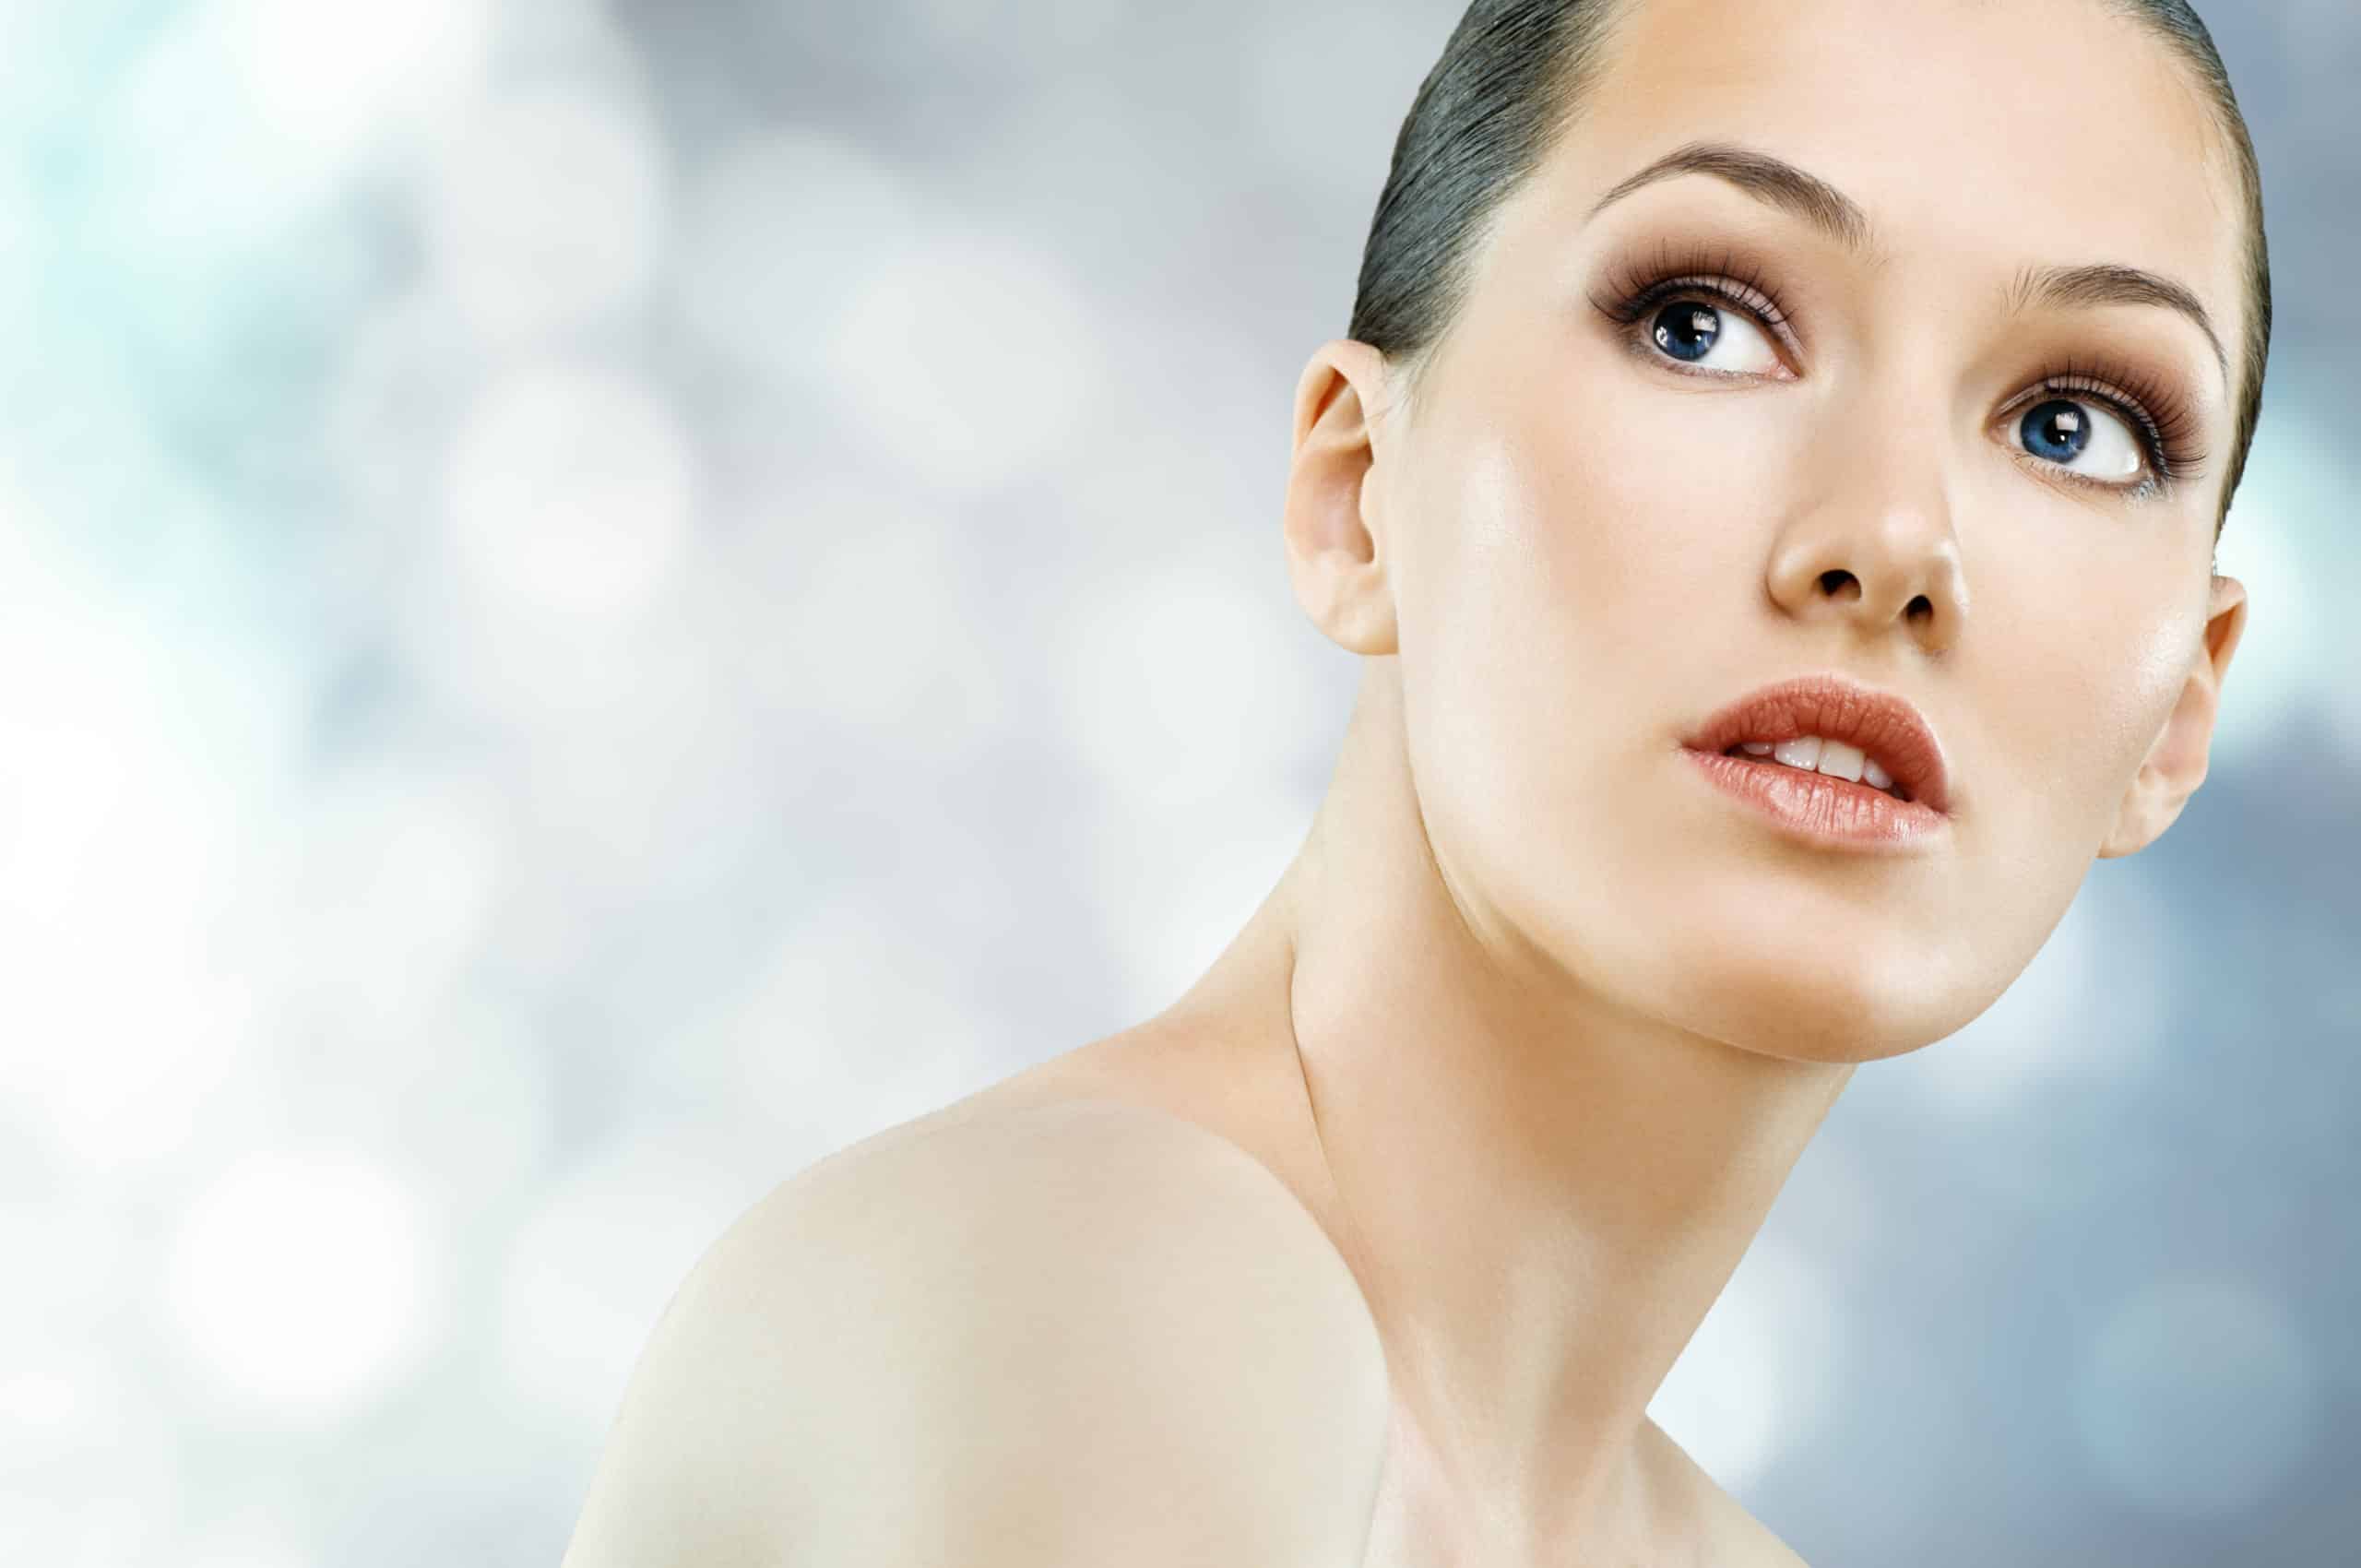 Shedding Microneedling - Biologics - the L.A.B. med spa / We will explain the science behind it ...